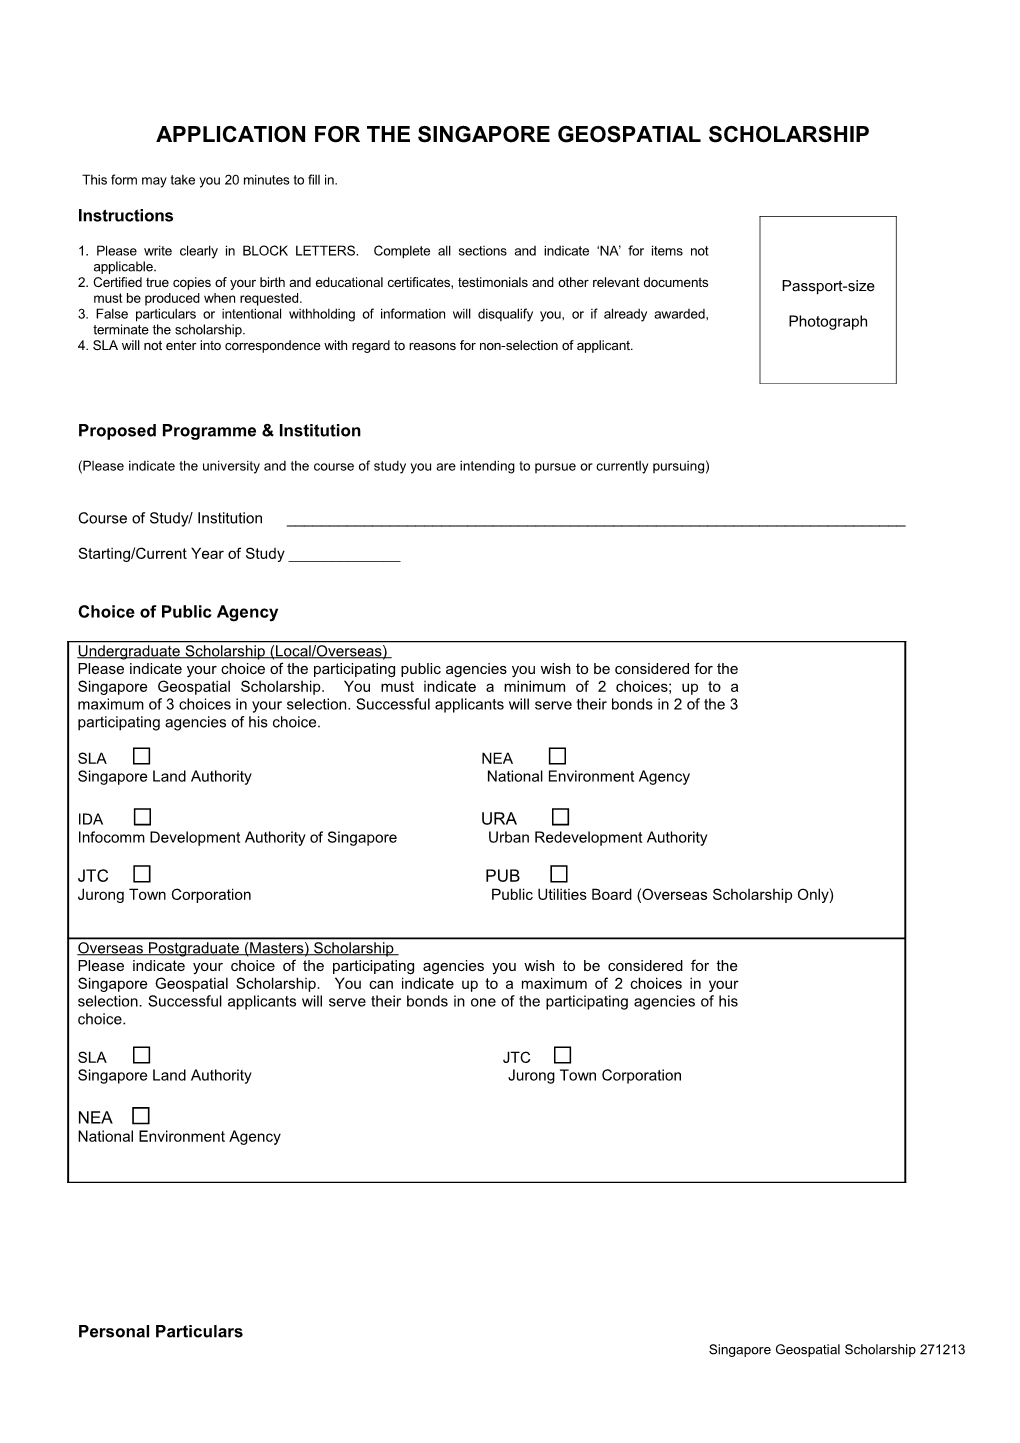 This Form May Take You 20 Minutes to Fill In s1